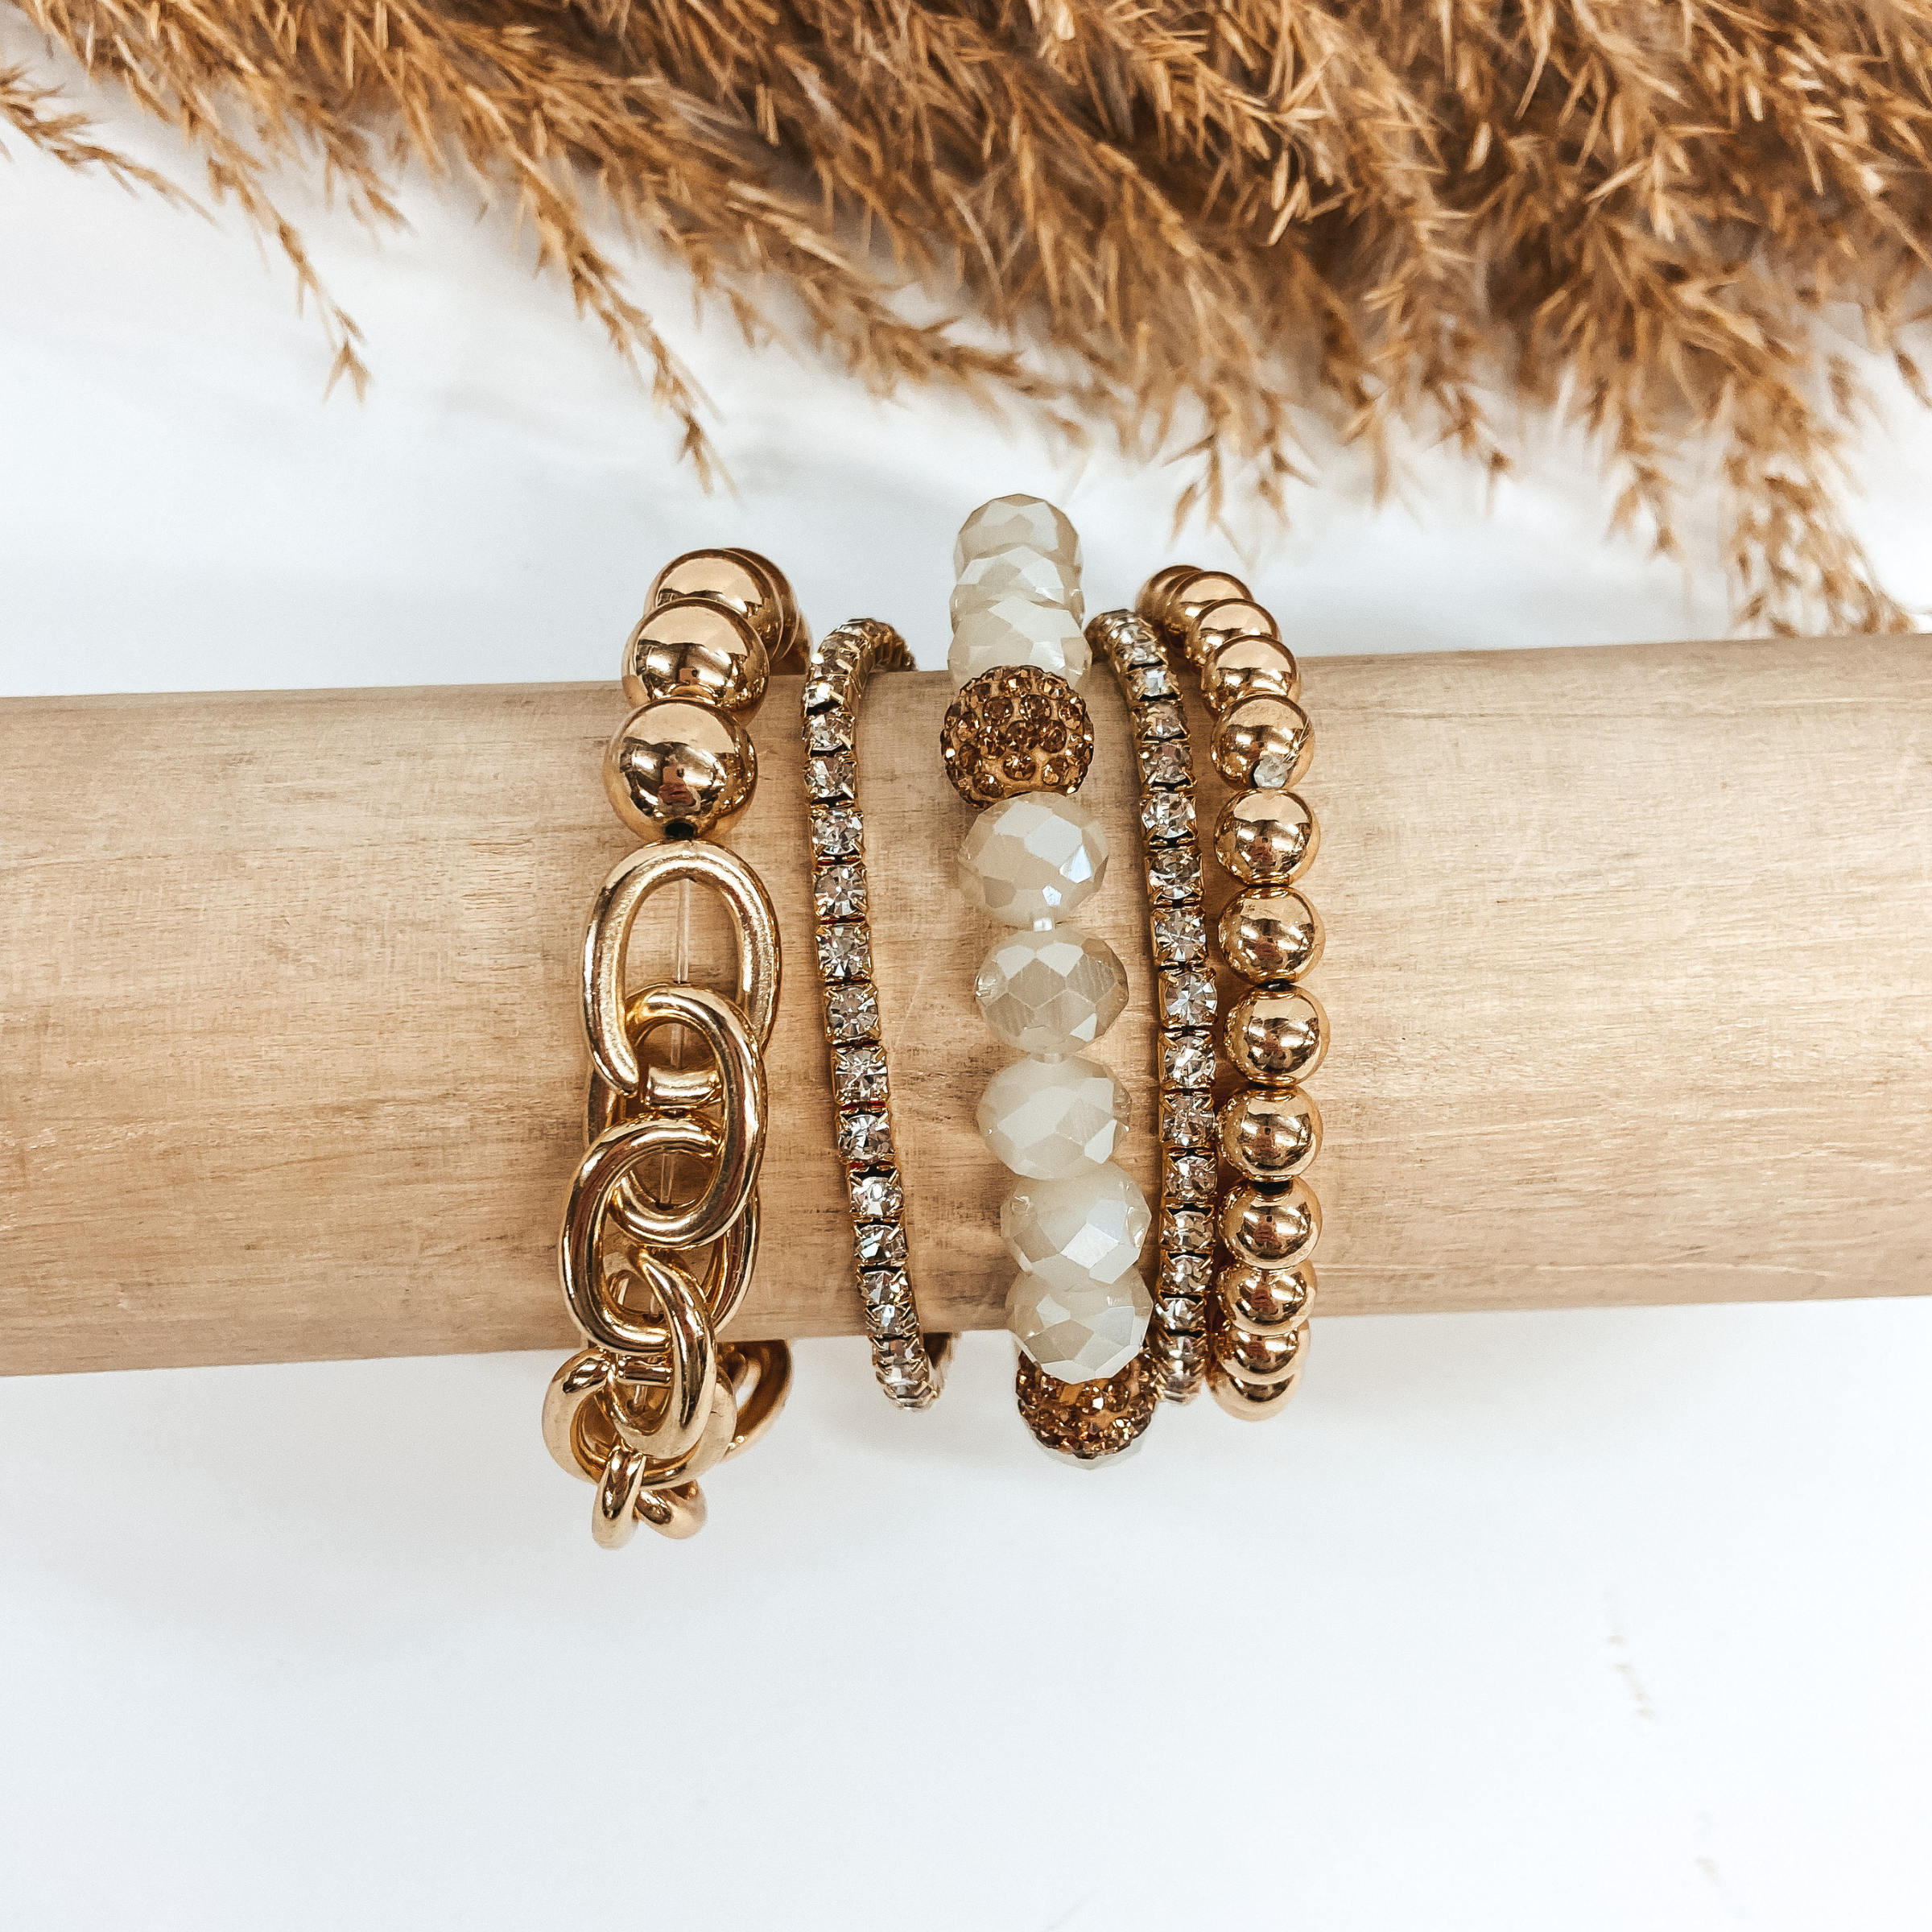  A mix of crystal and gold beaded bracelets placed on a wooden slat. Pictured on a white background with pampas grass.